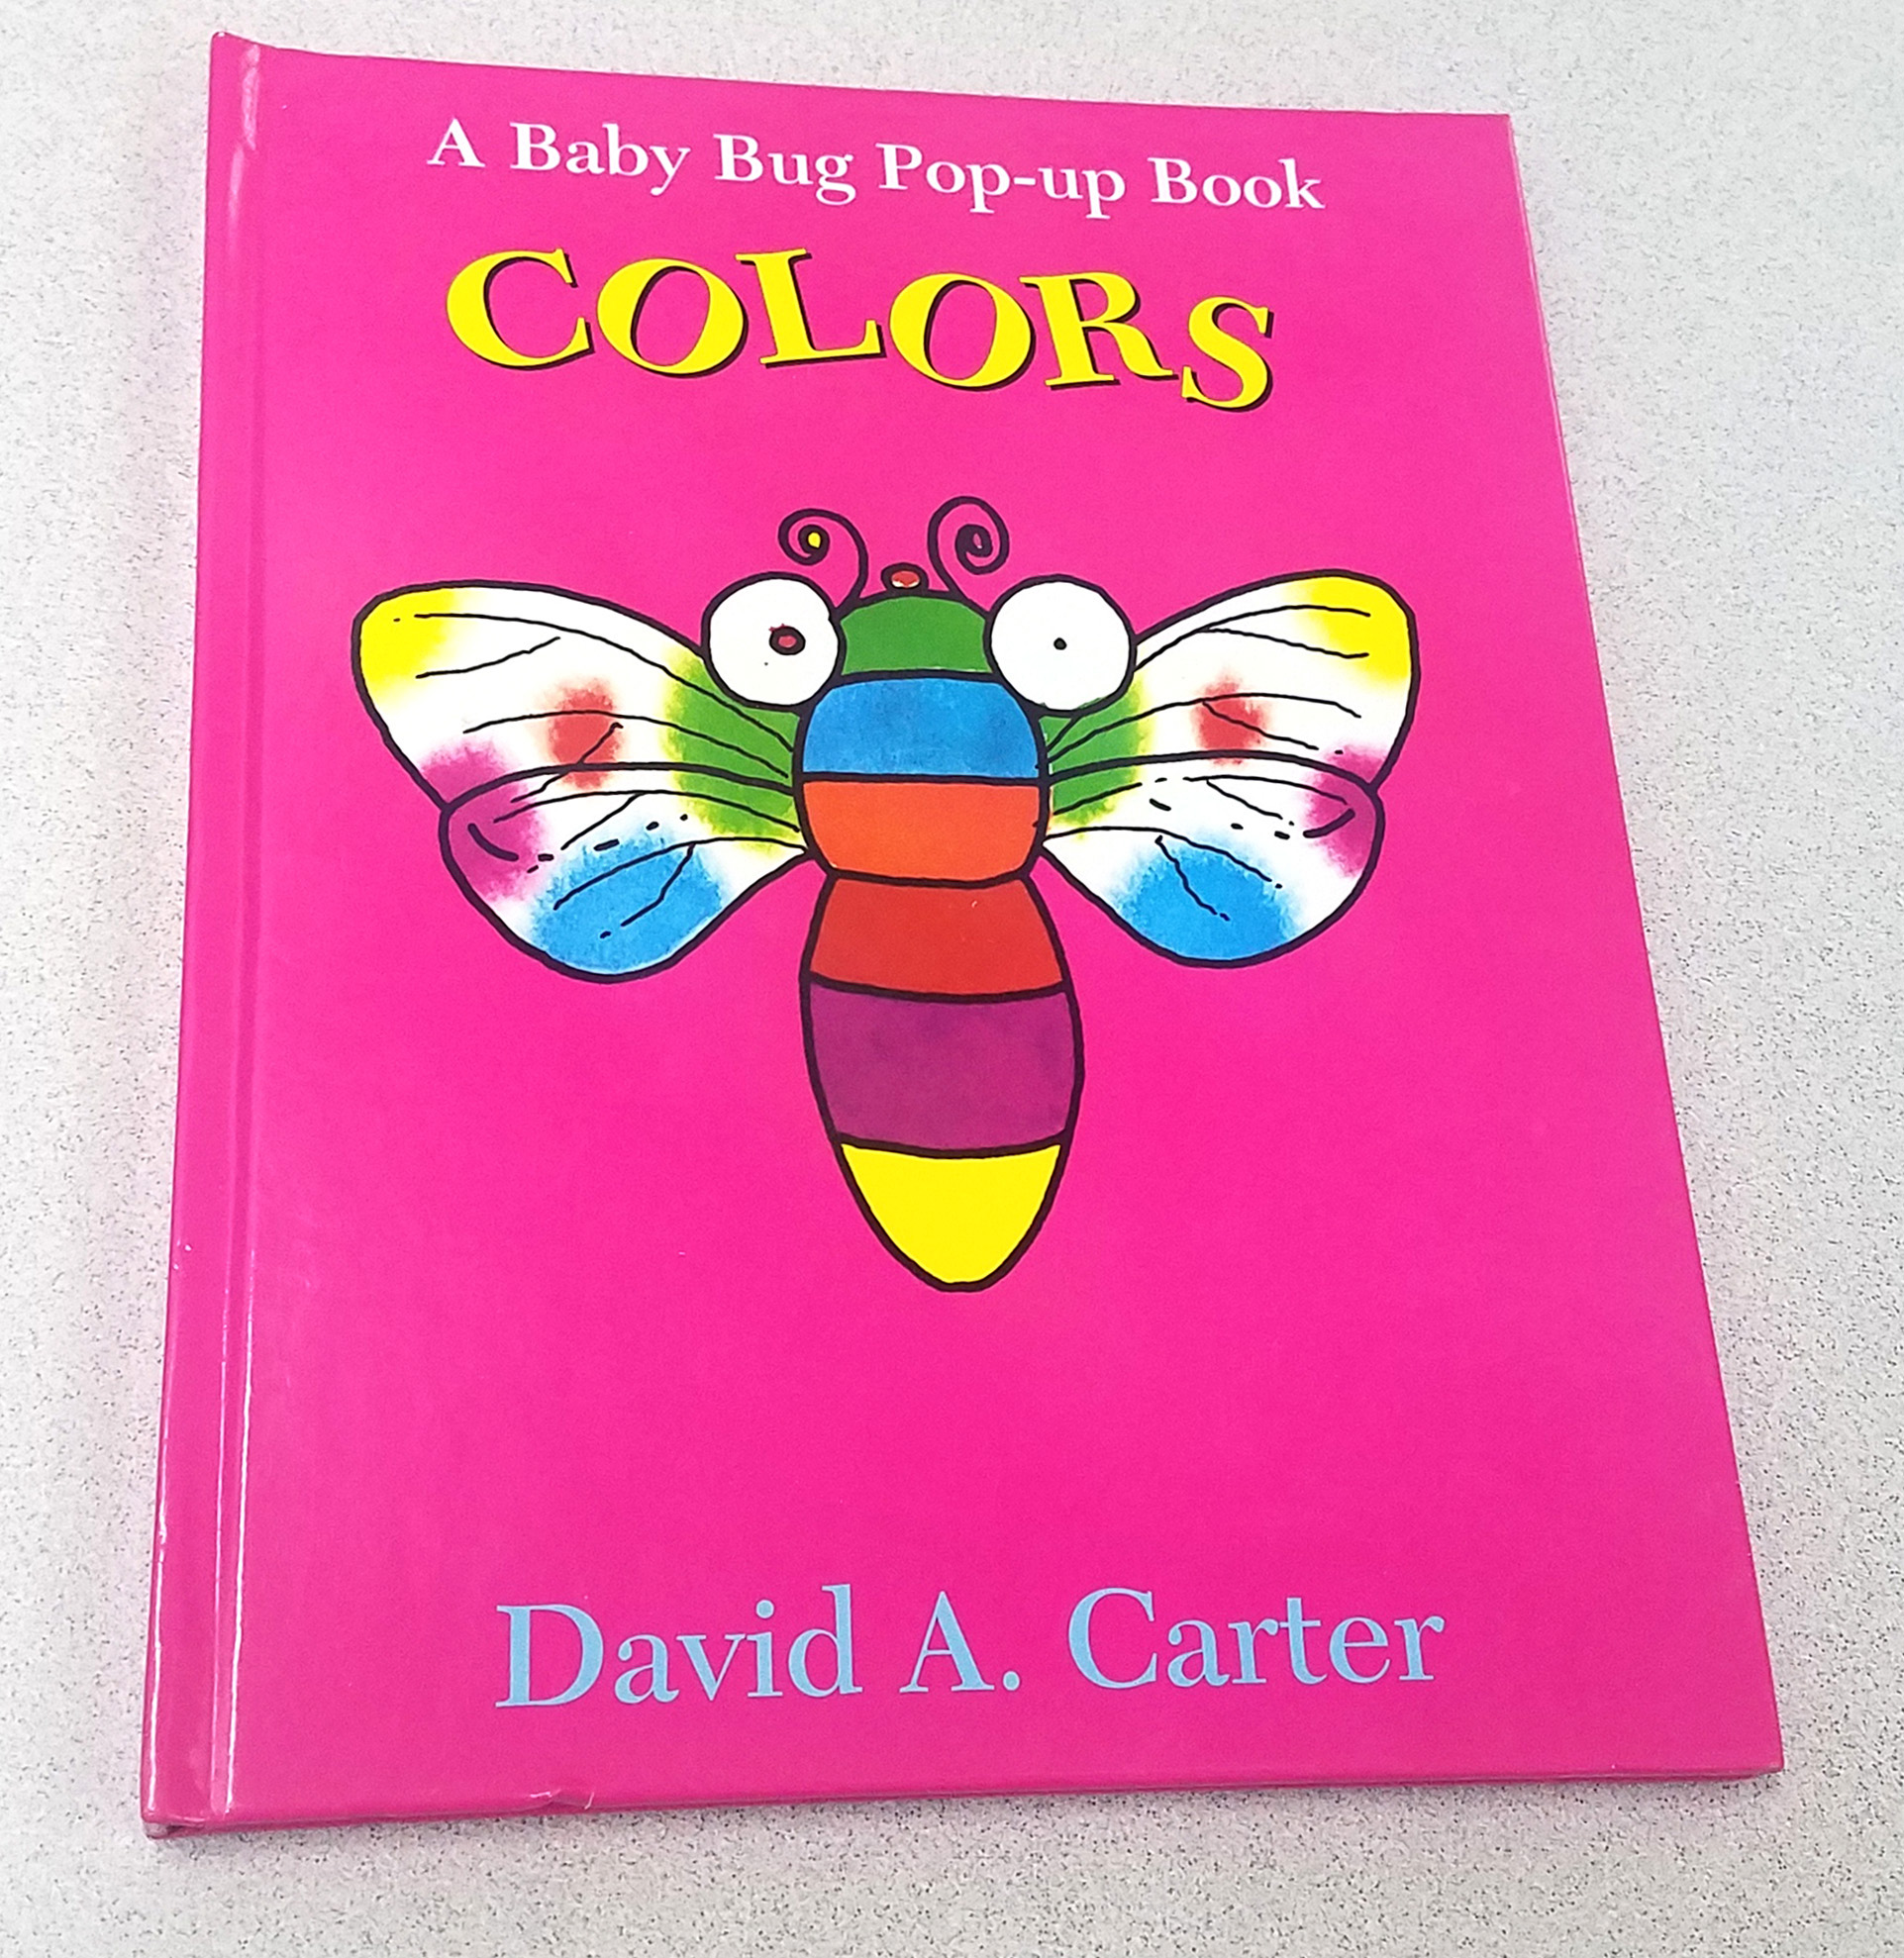 Image features book cover showing a colorful flying bug on a fuchsia background. Please scroll down to read the blog post about this object.